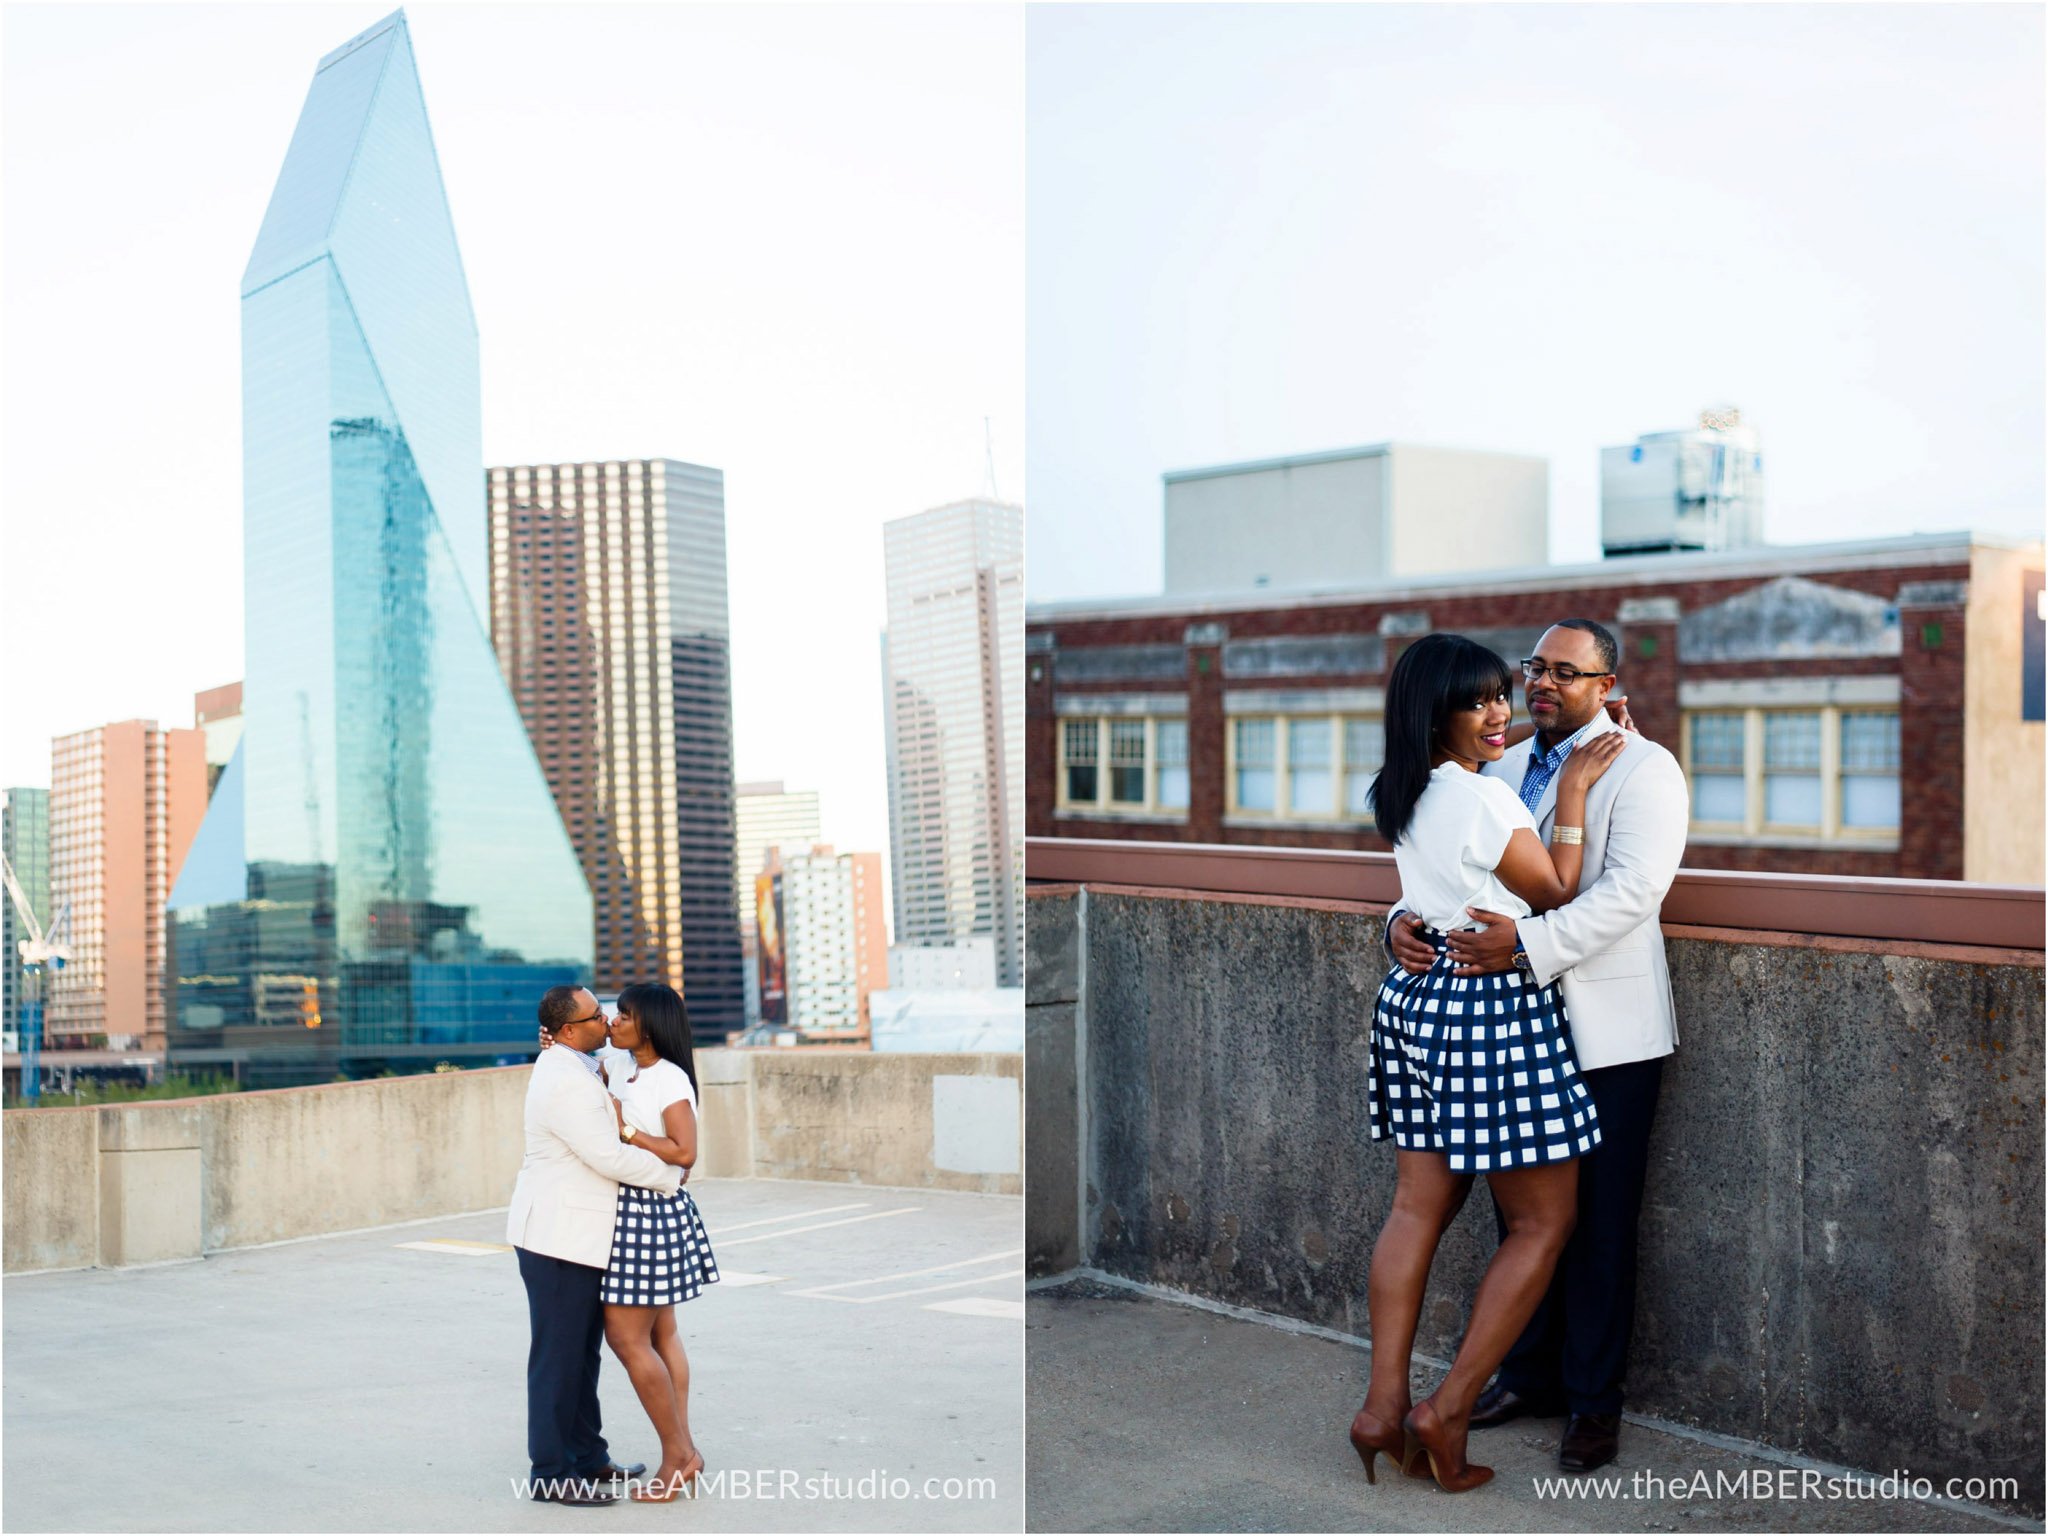 Black wedding photographer captured this images at a special location in Dallas. African American couple is embracing on a rooftop with the Dallas skyline in the background.